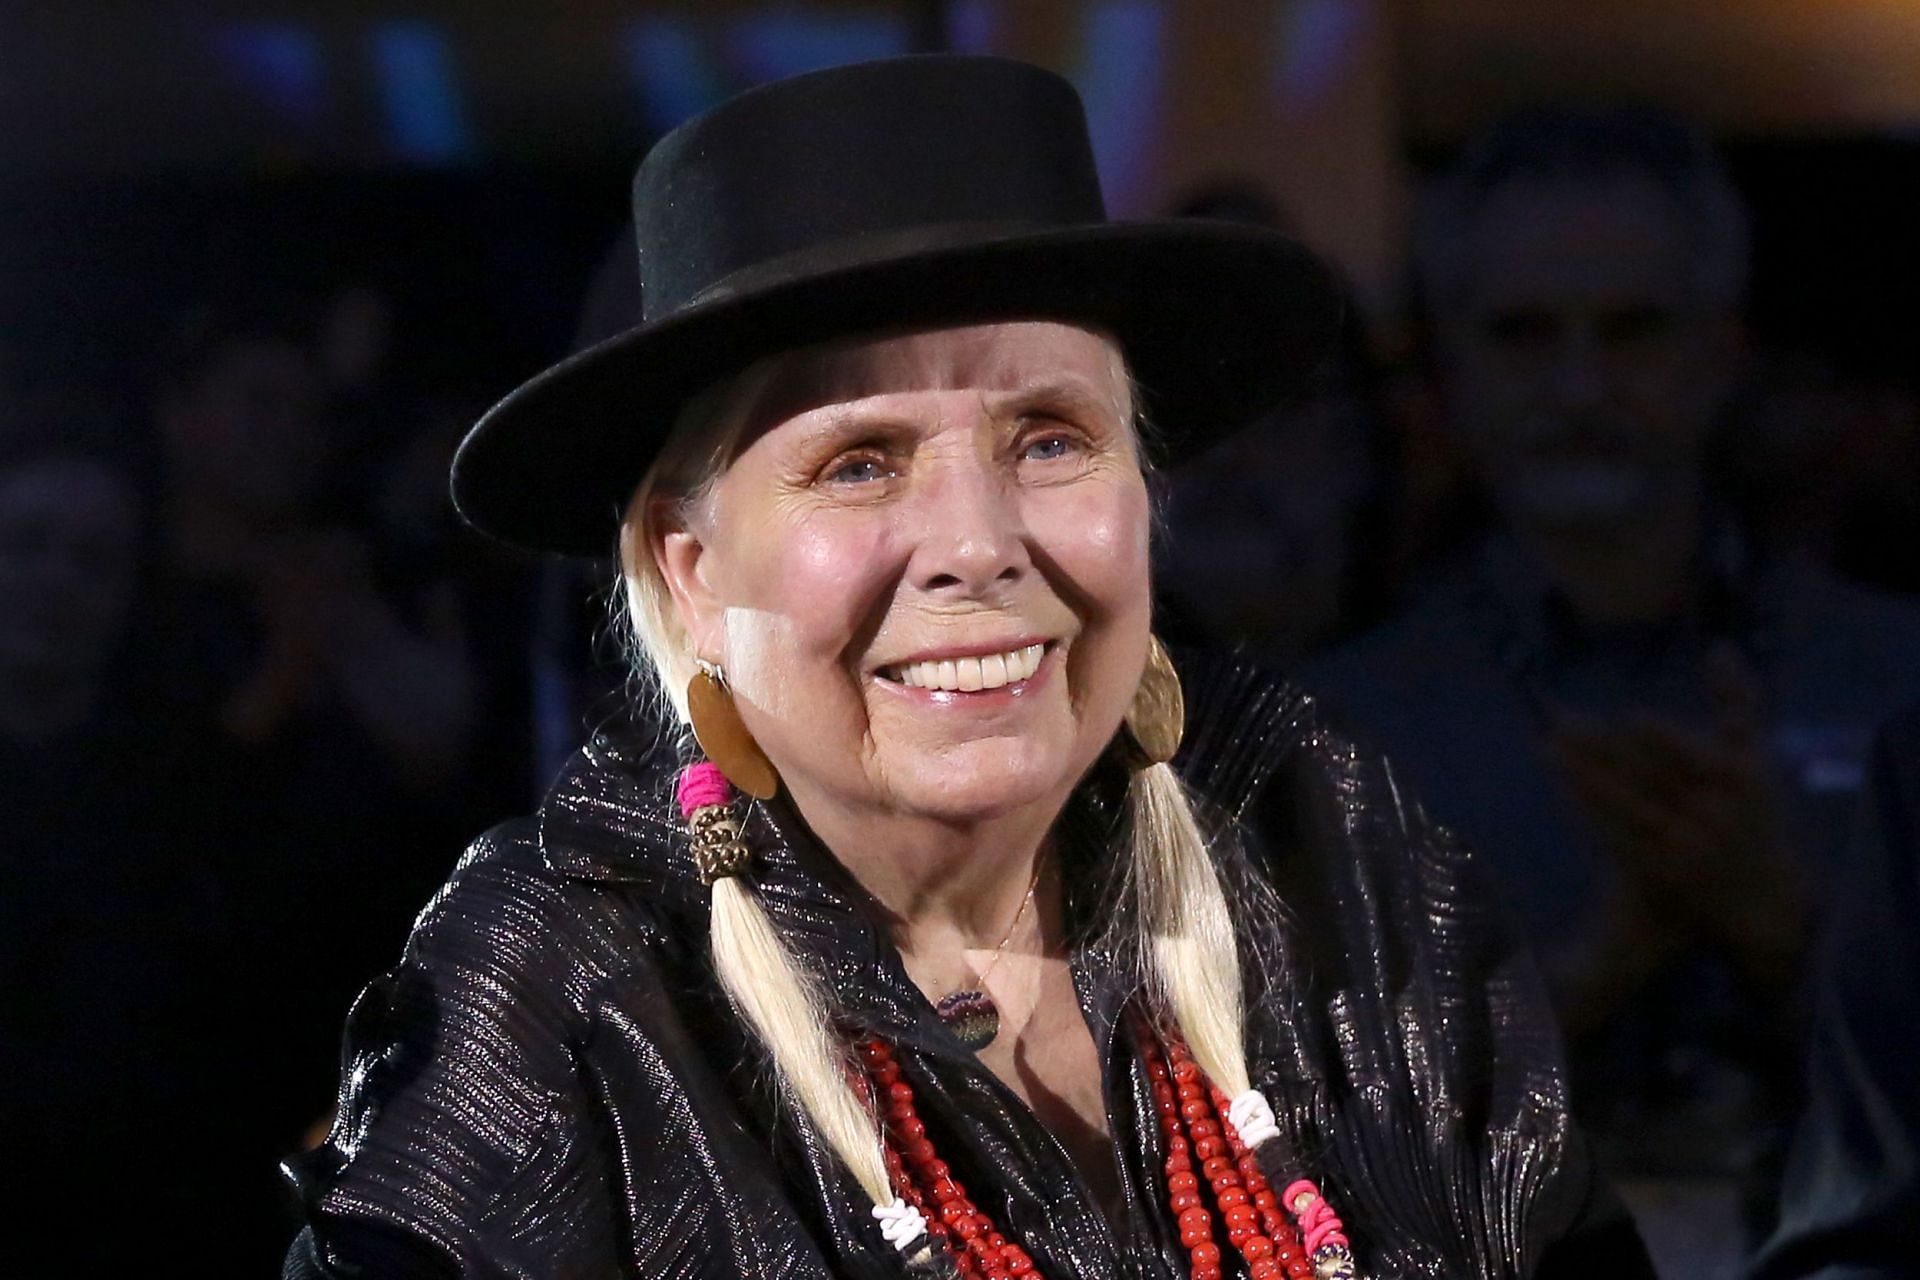 Joni Mitchell at the 35th Annual NAMM TEC Awards in 2020 (Image via Jesse Grant/Getty Images)